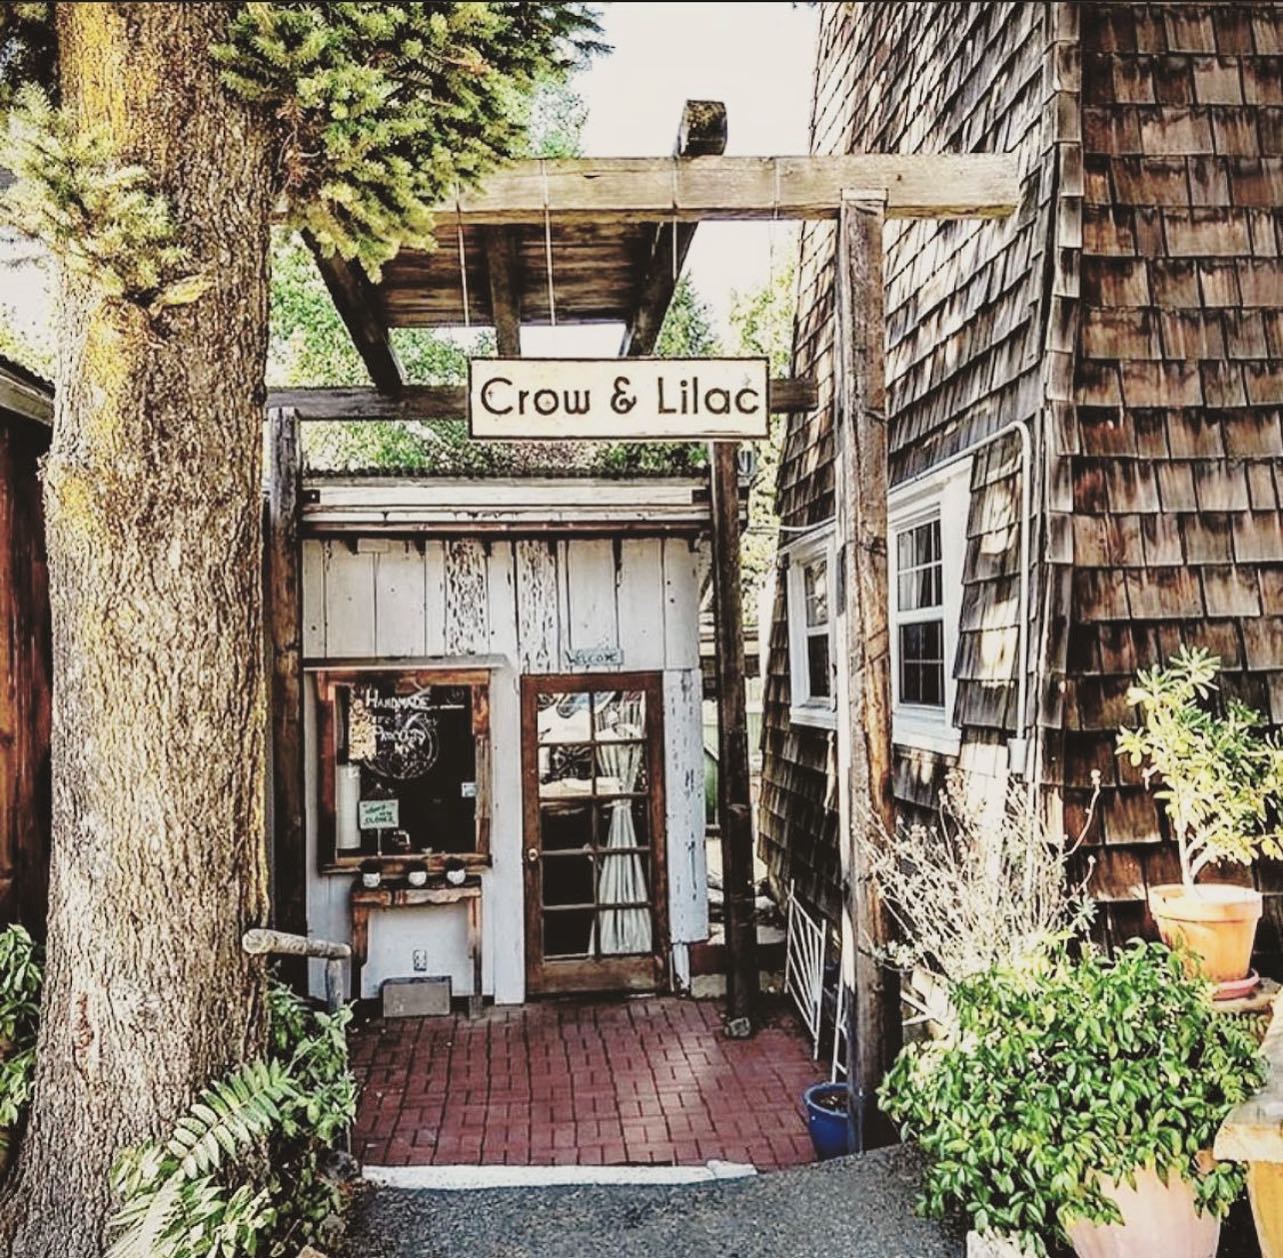 Crow & Lilac Storefront Photo